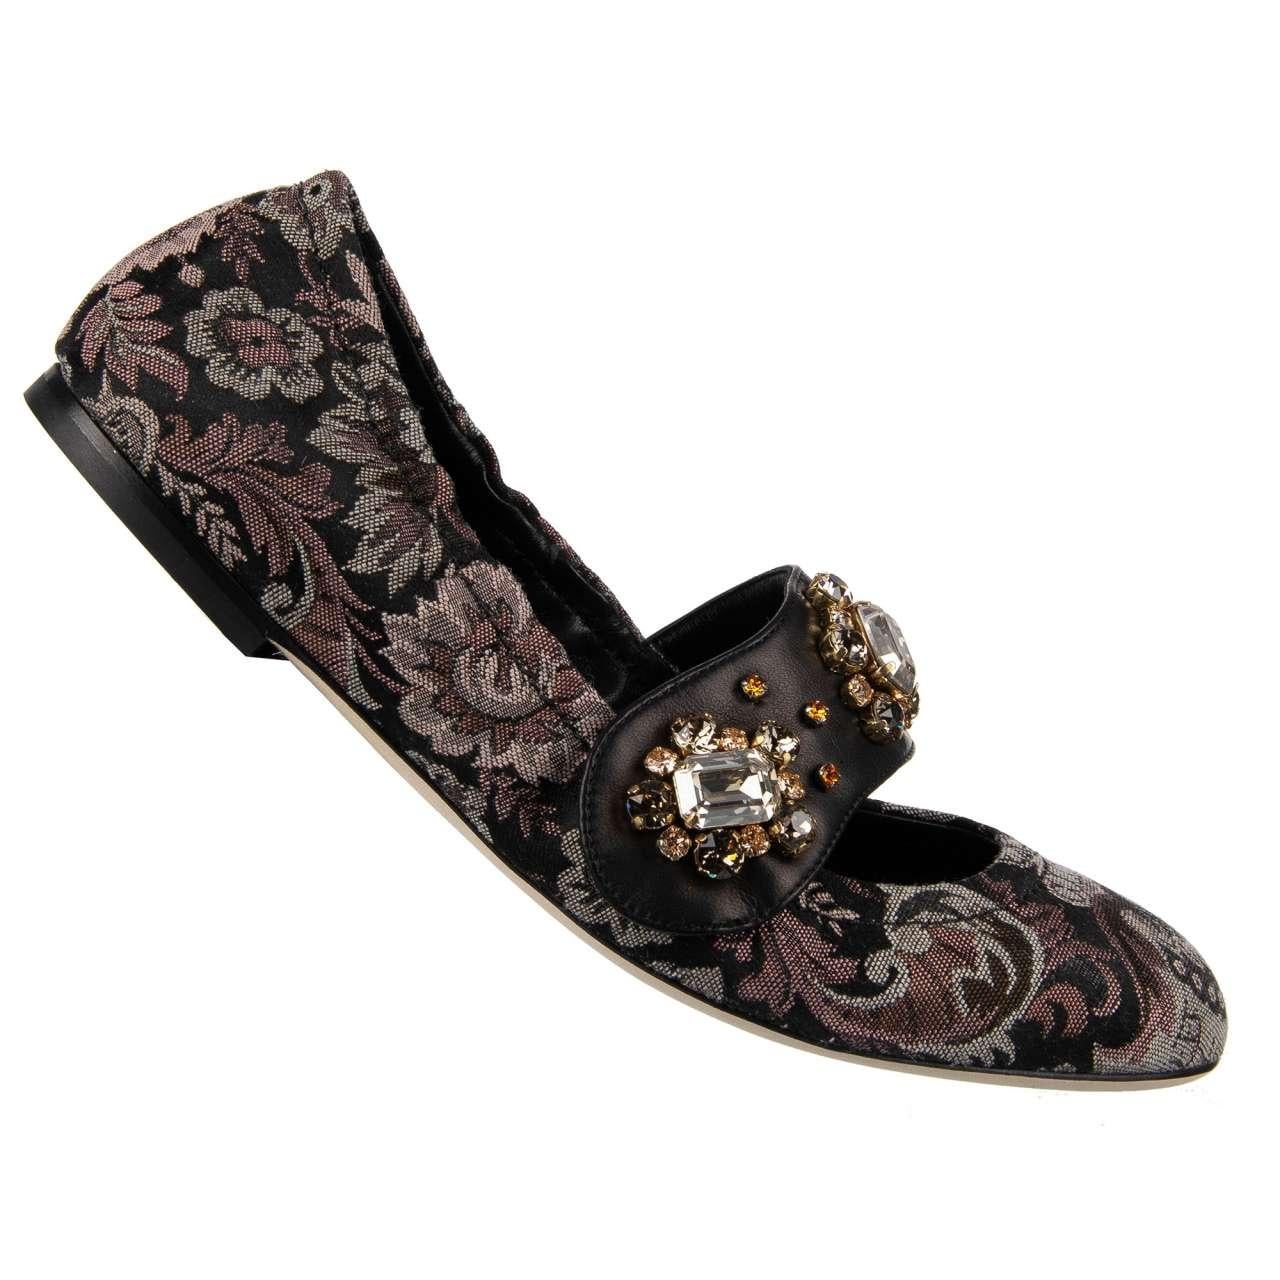 Dolce & Gabbana - Brocade Ballet Flats VALLY with Crystals 38.5 For Sale 1